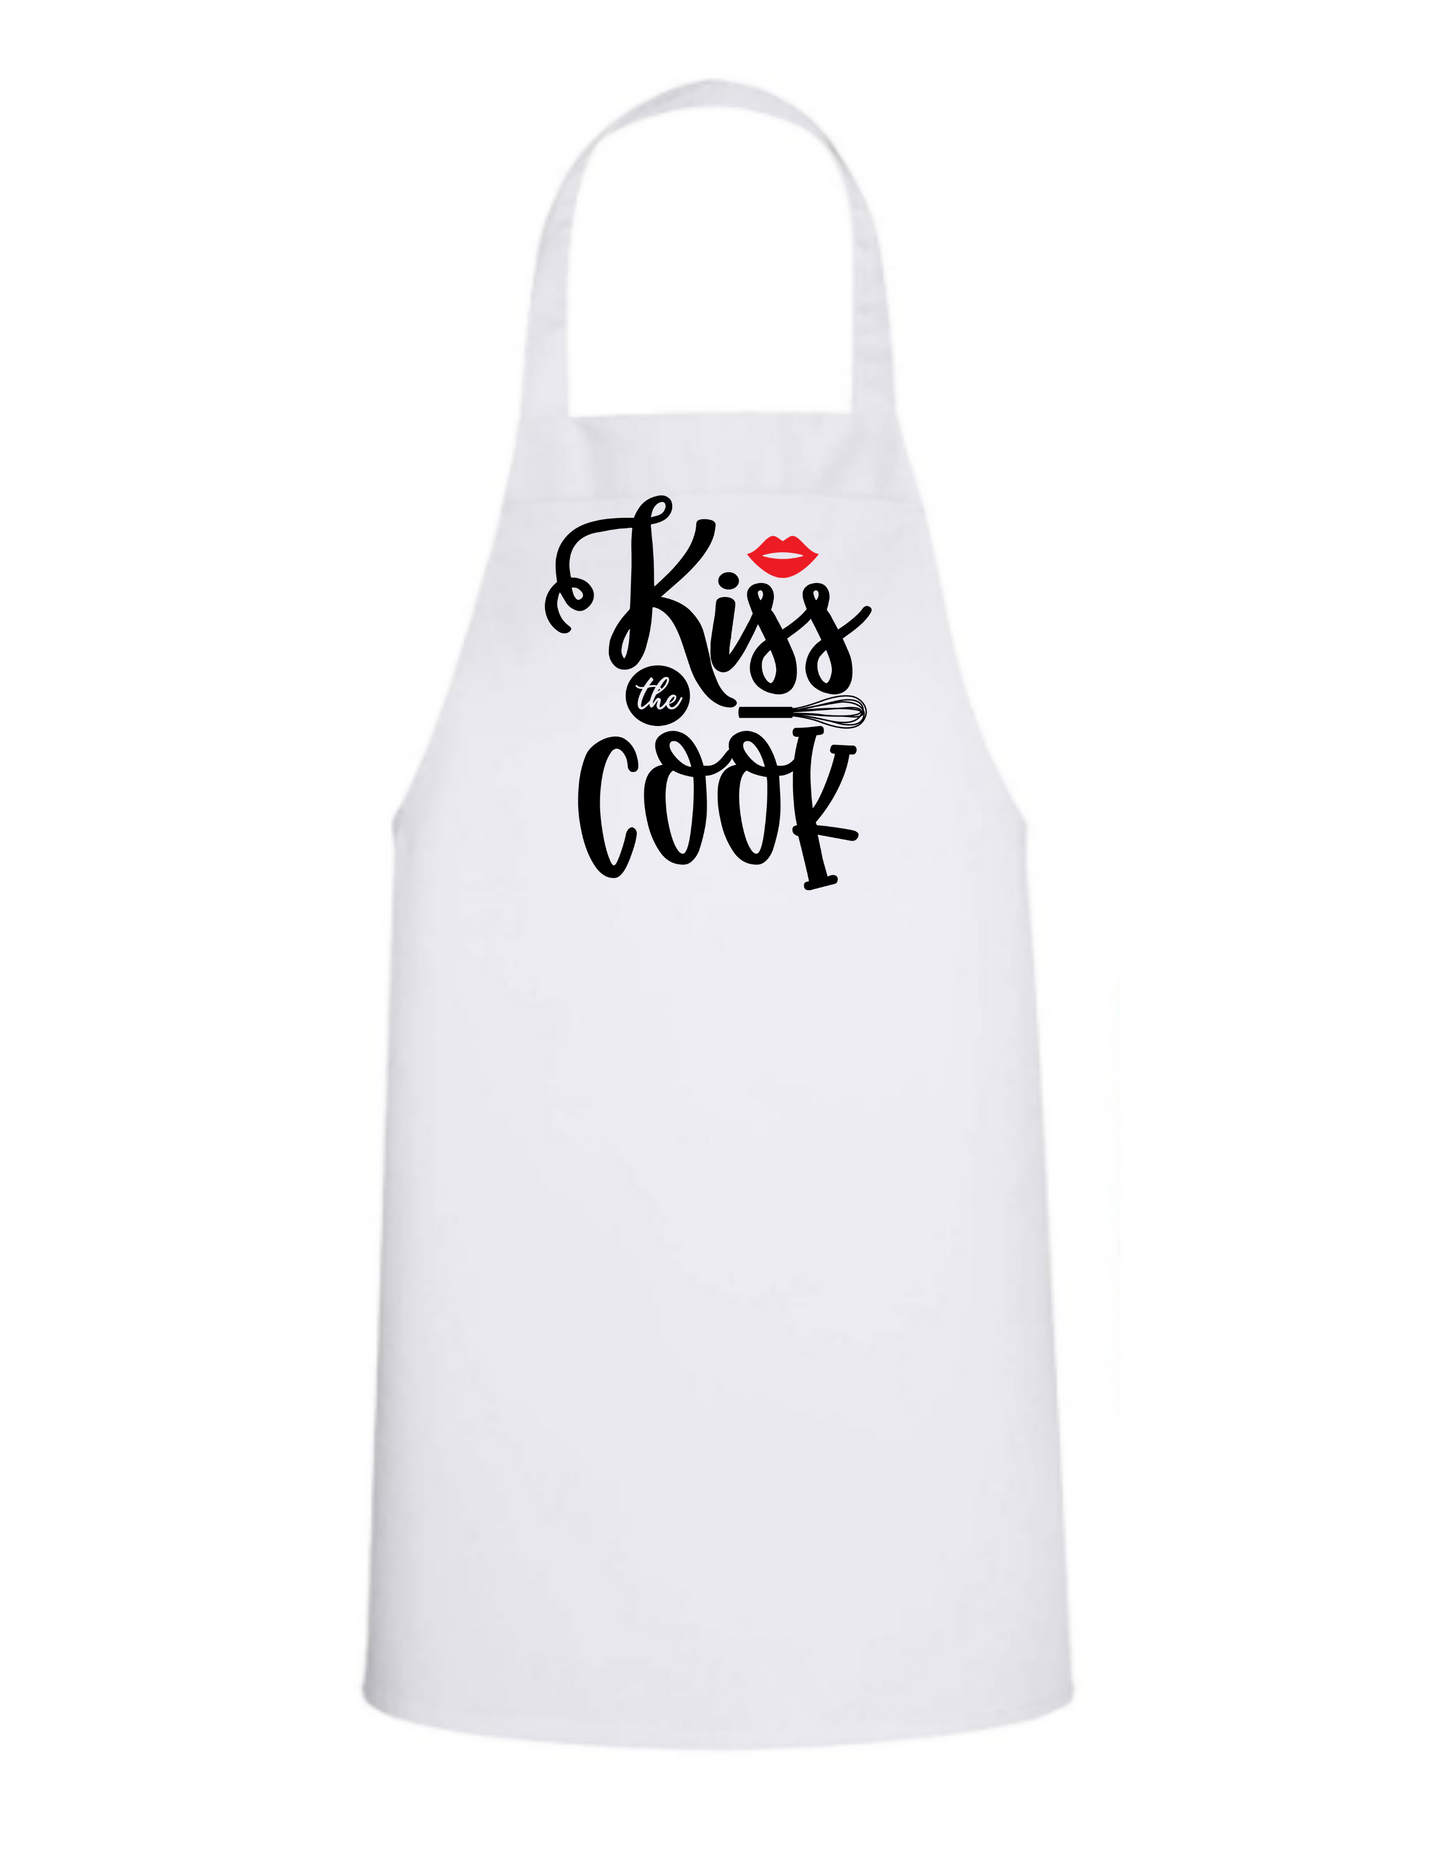 Kiss the Cook - White Apron with Color design Great Gift - Mister Snarky's